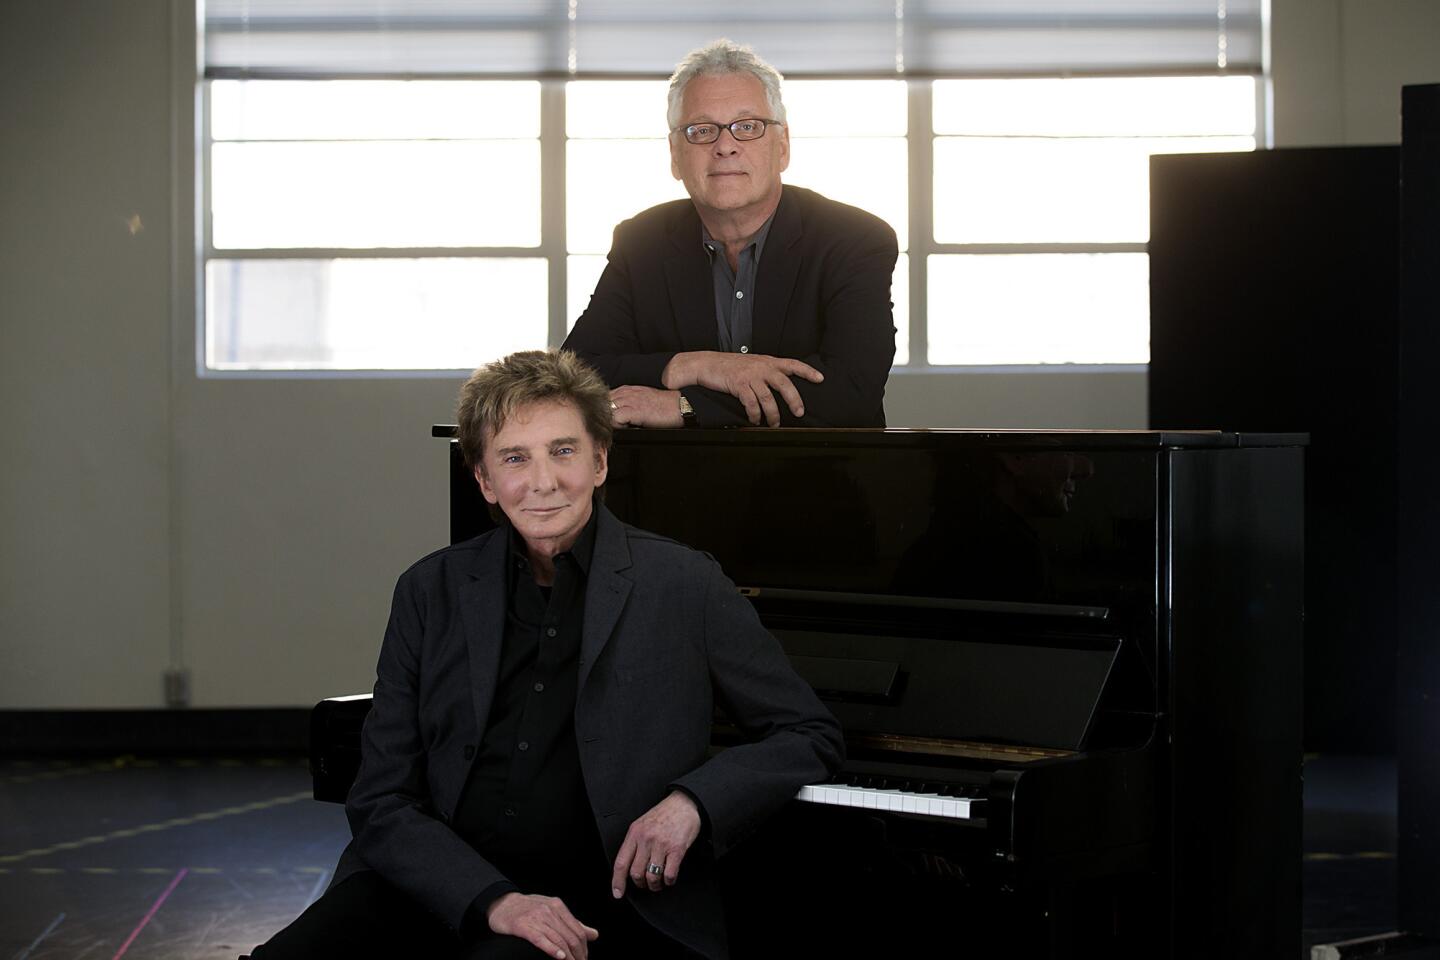 Arts and culture in pictures by The Times | Barry Manilow and Bruce Sussman